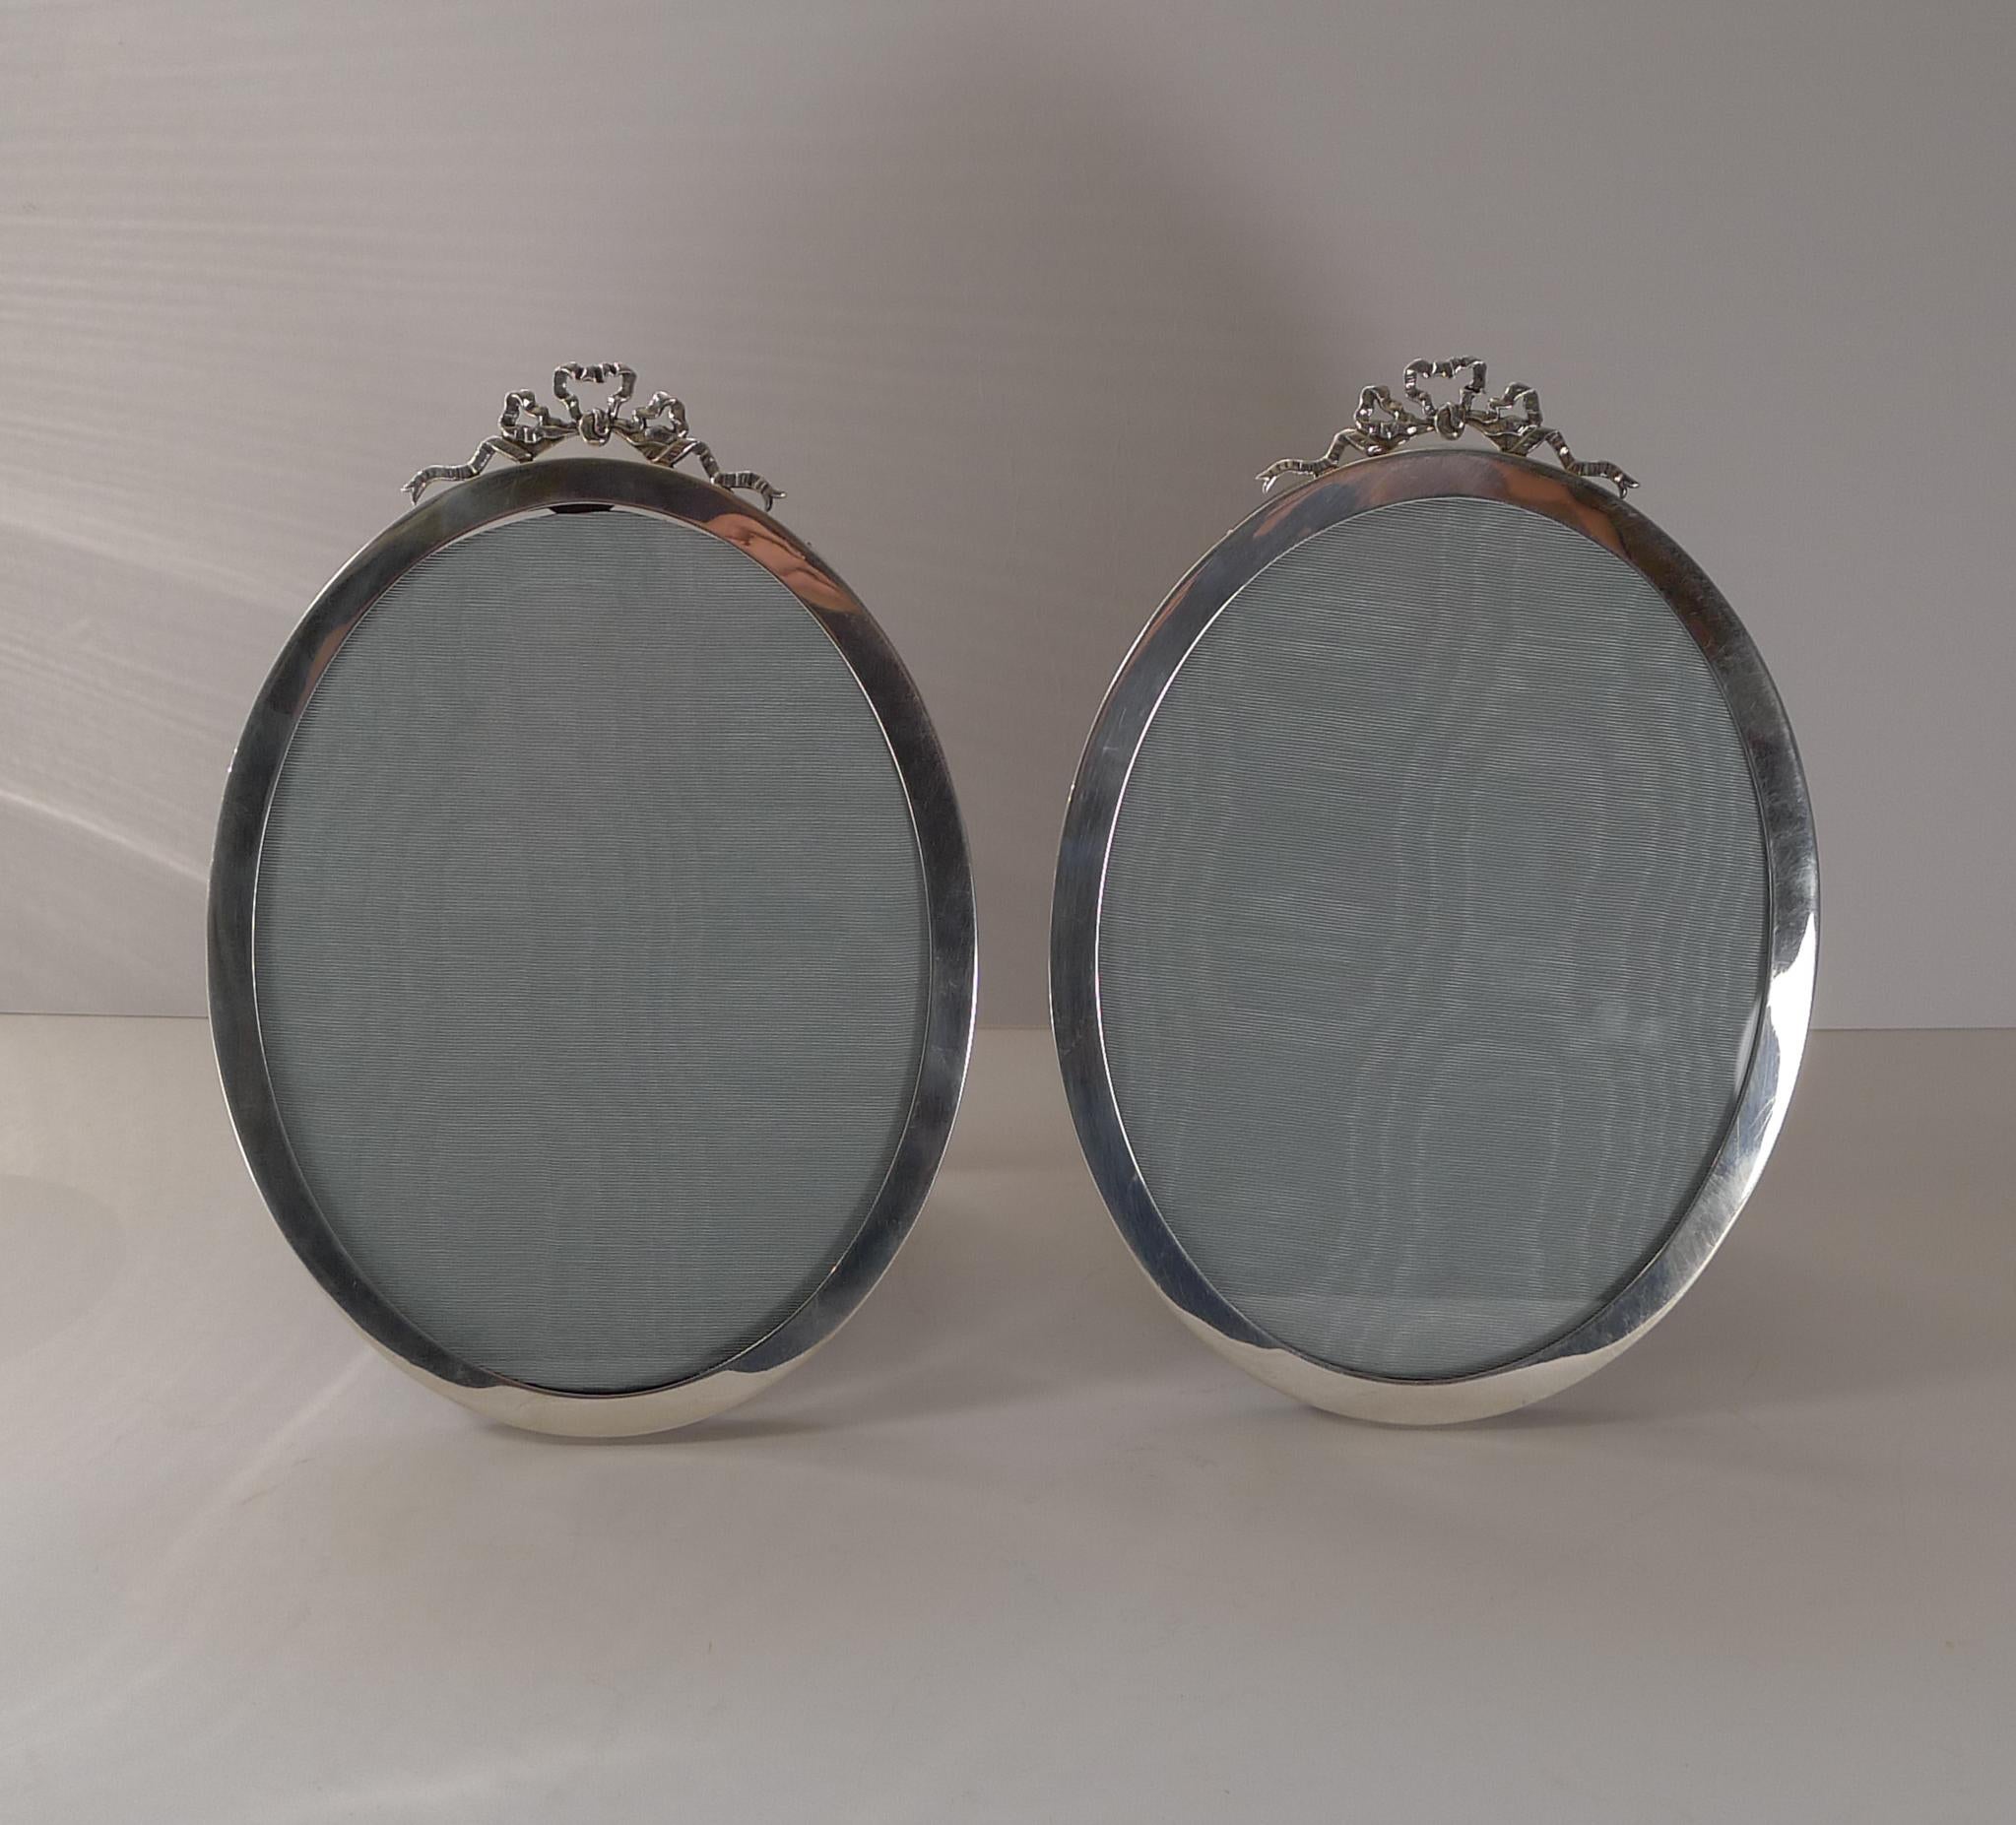 A stunning pair of oval photograph frames, made from English sterling silver topped with ribbon and bow mounts.

The backs are made from solid oak incorporating a folding easel back stand.

The silver is fully hallmarked for Birmingham 1915